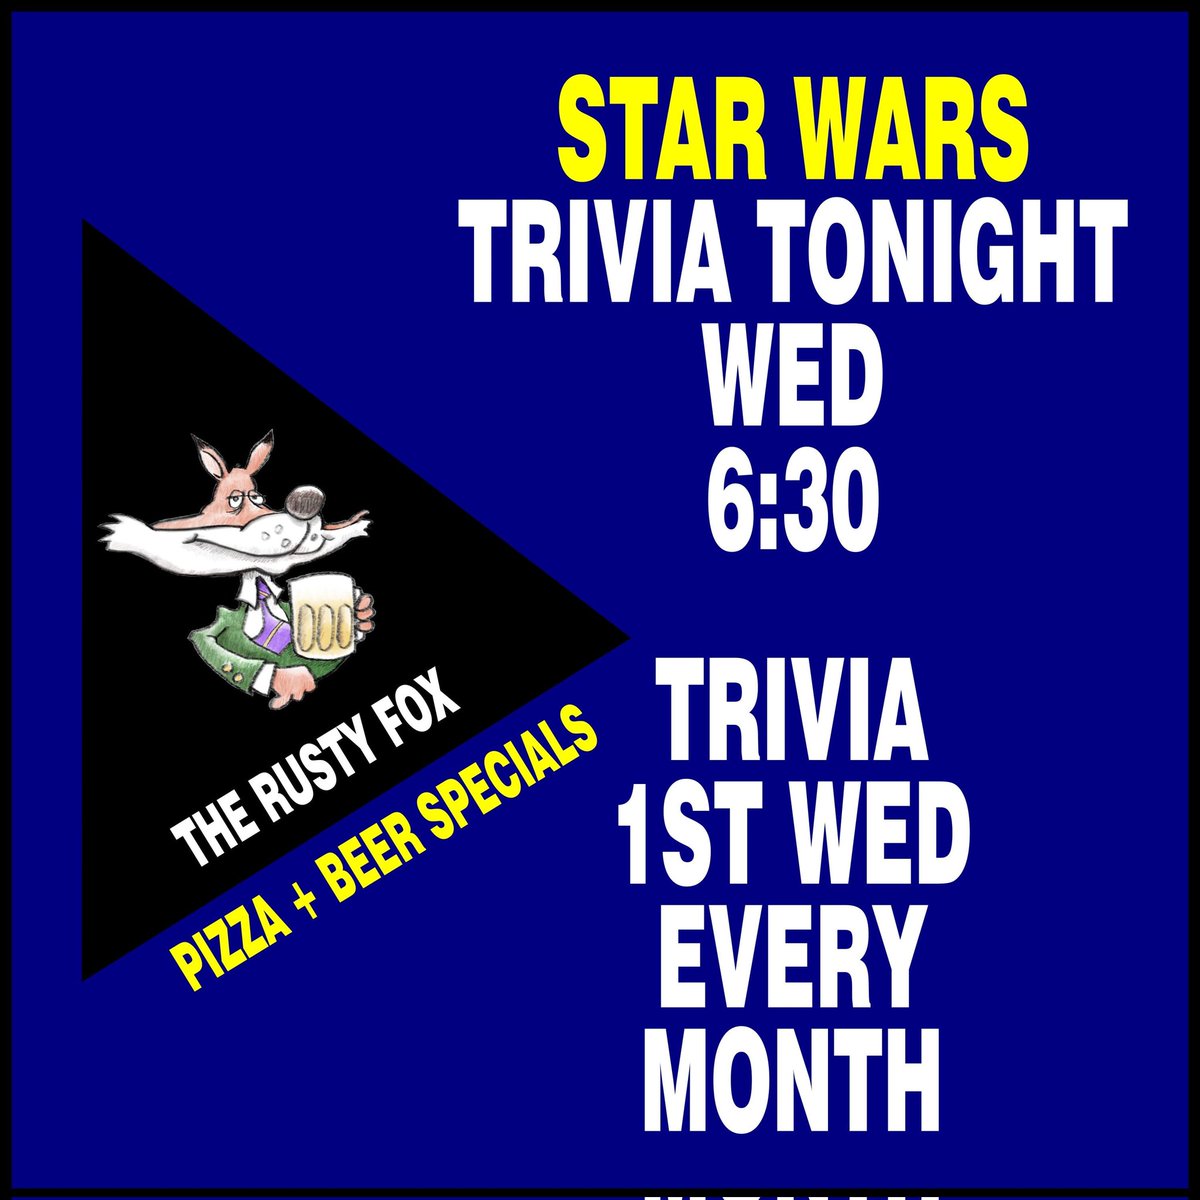 We have trivia 1st Wed every month. Beer + pizza specials. And we are set up to do trivia anytime so if you're bored ask us to start some.

#rustyfox #craftbeerbar #craftbeerlover #SterlingIL #dixonillinois #starwars #SaukValley #MayThe4th #trivia #TriviaNight #TriviaTime